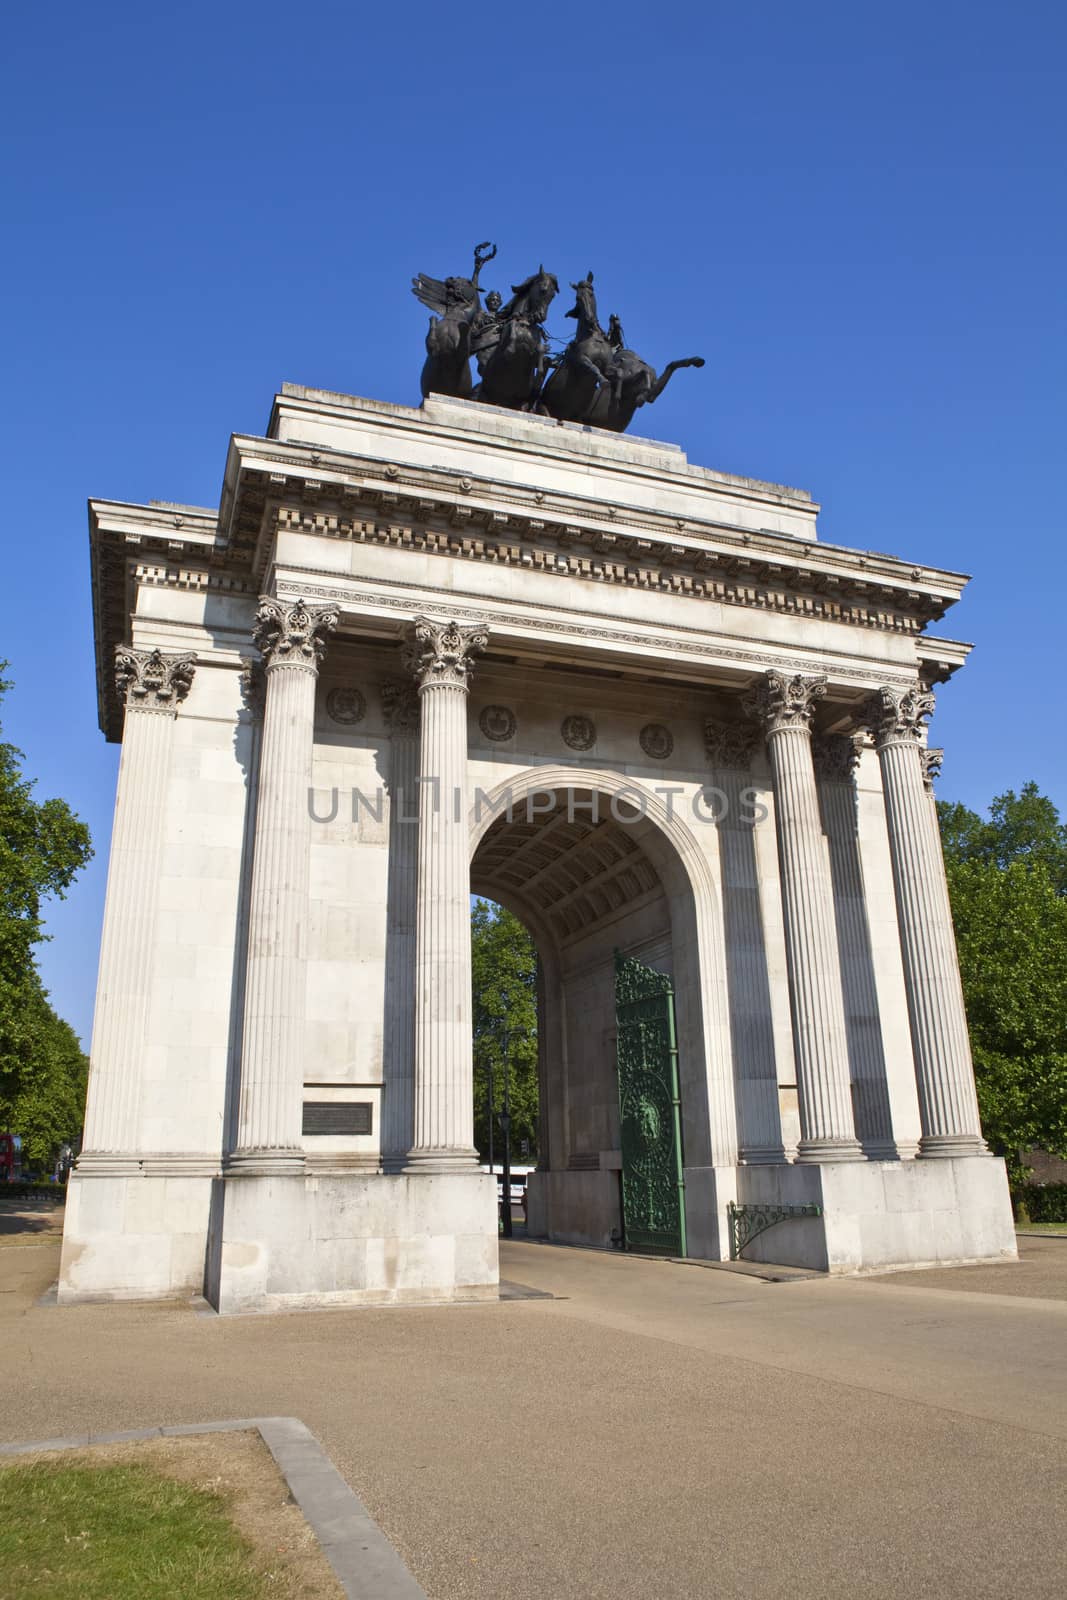 The magnificent Wellington Arch in London.